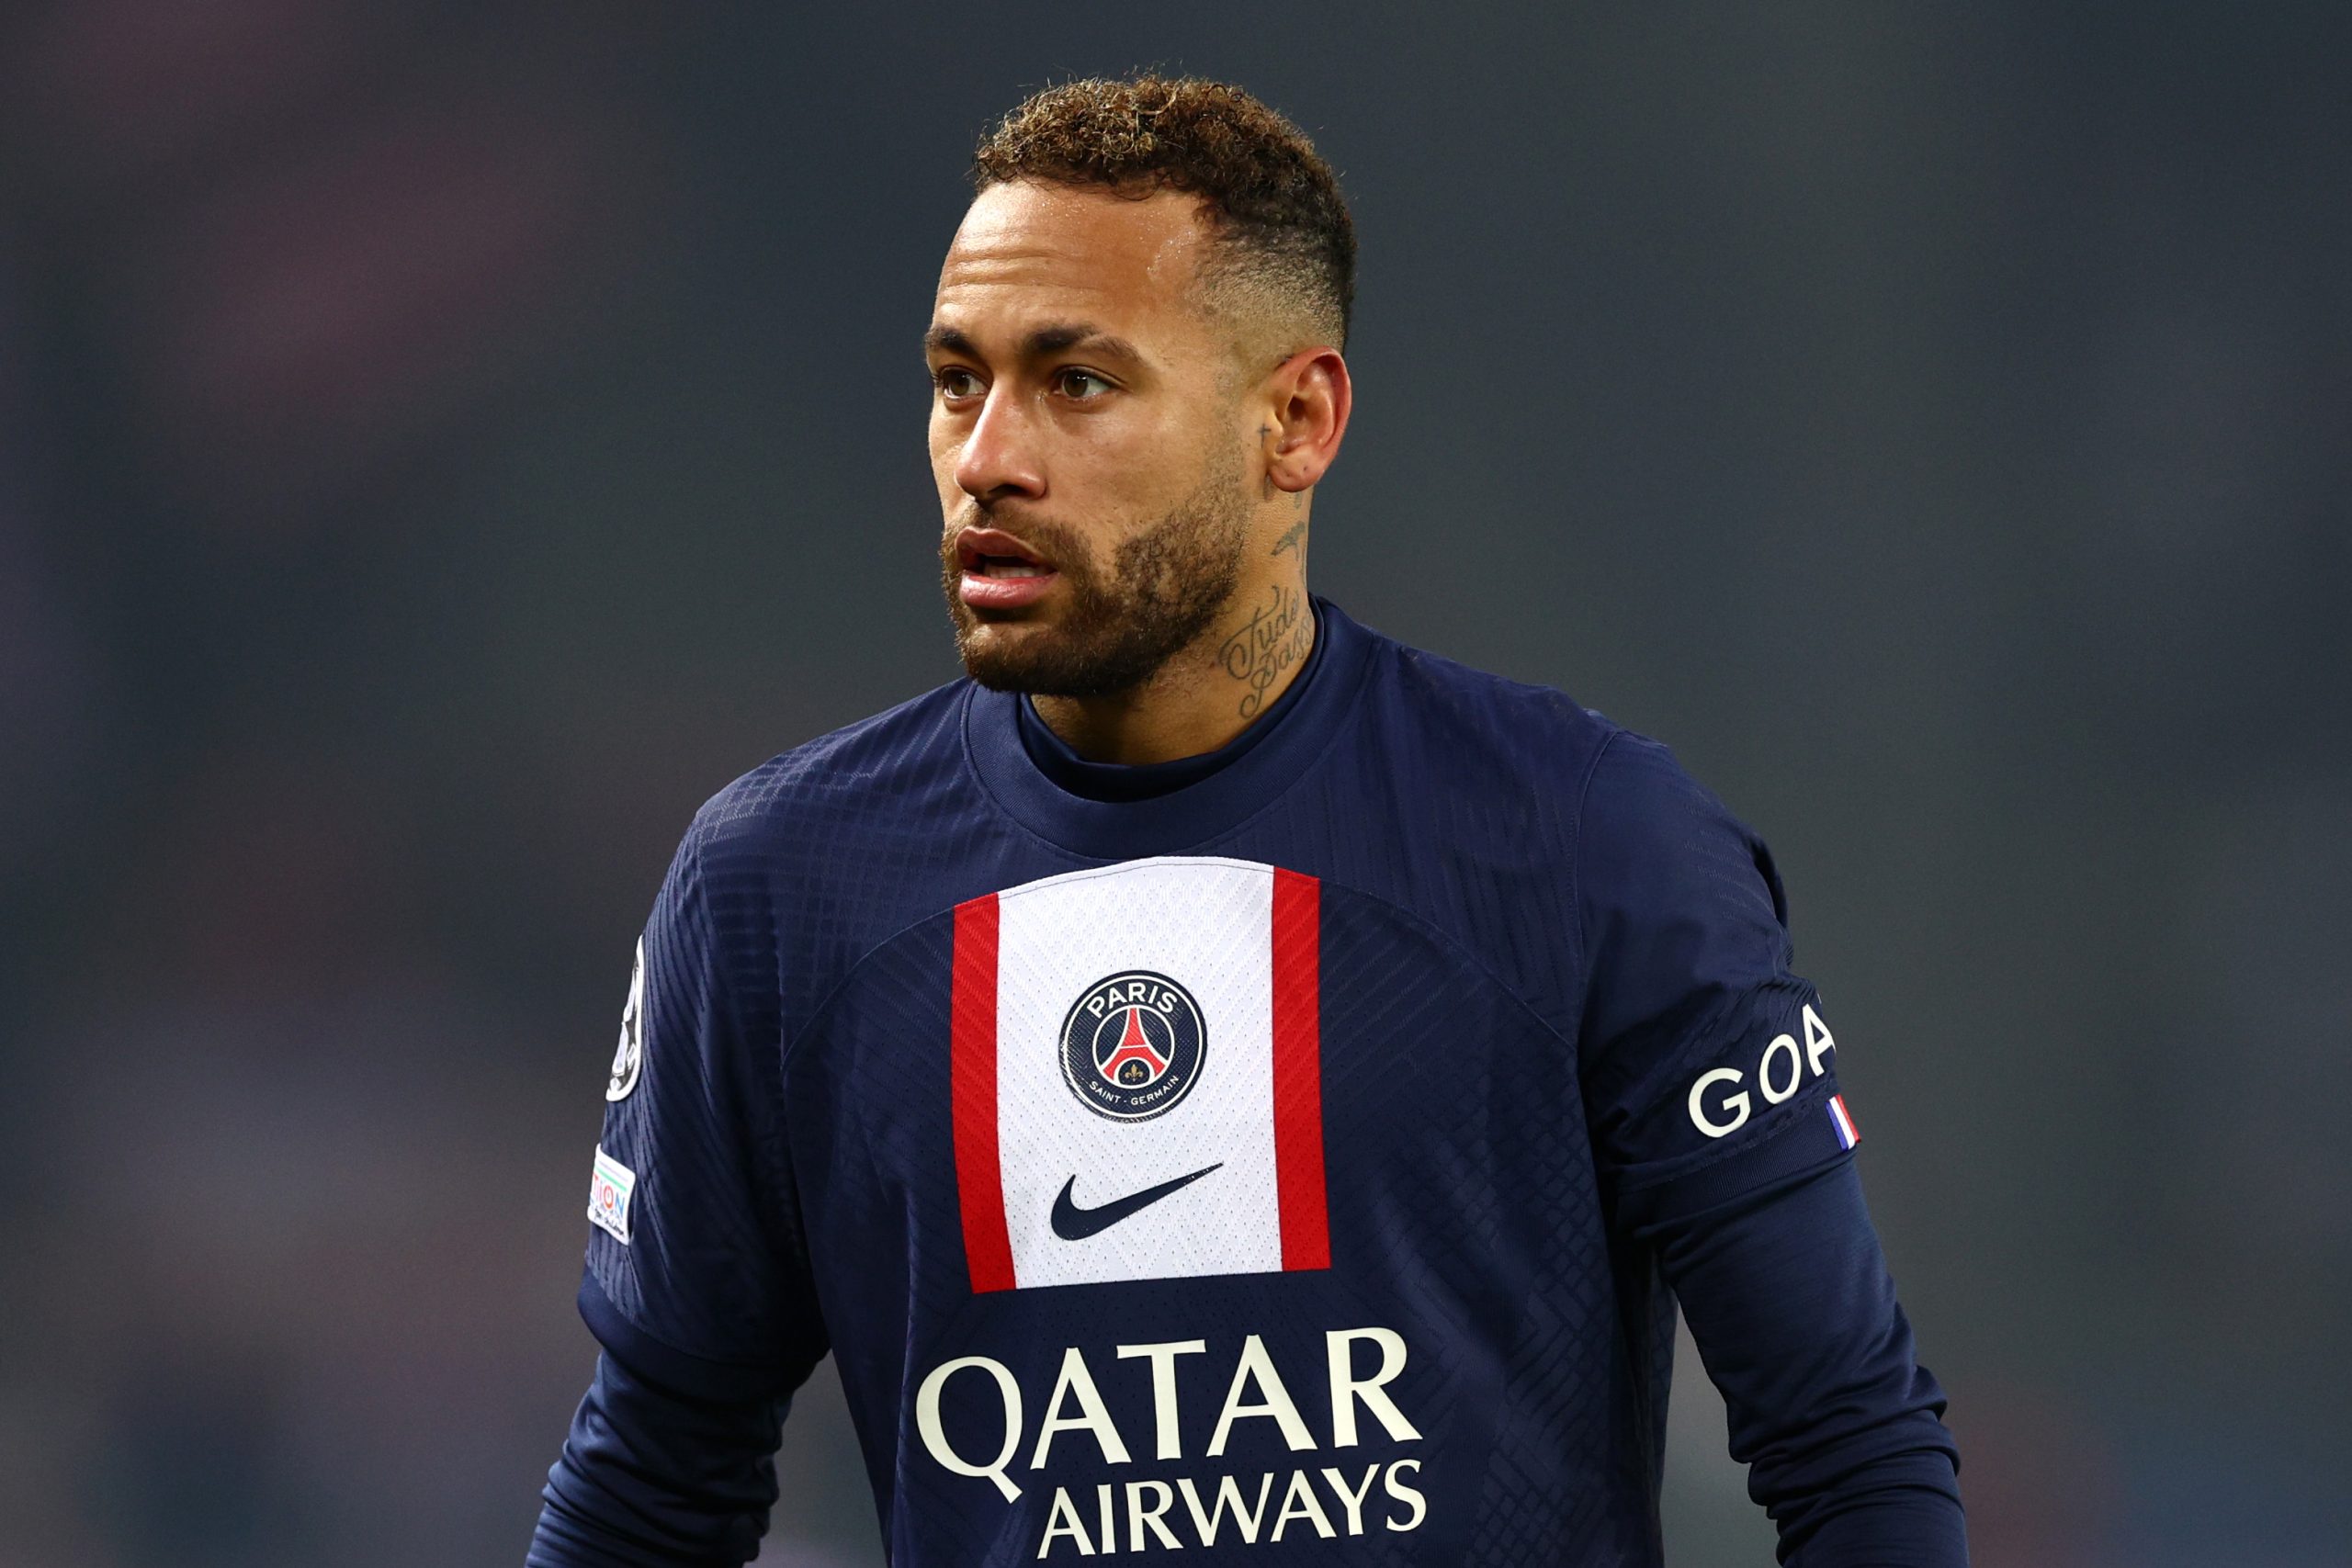 Manchester United are in advanced talks to sign Chelsea target Neymar.